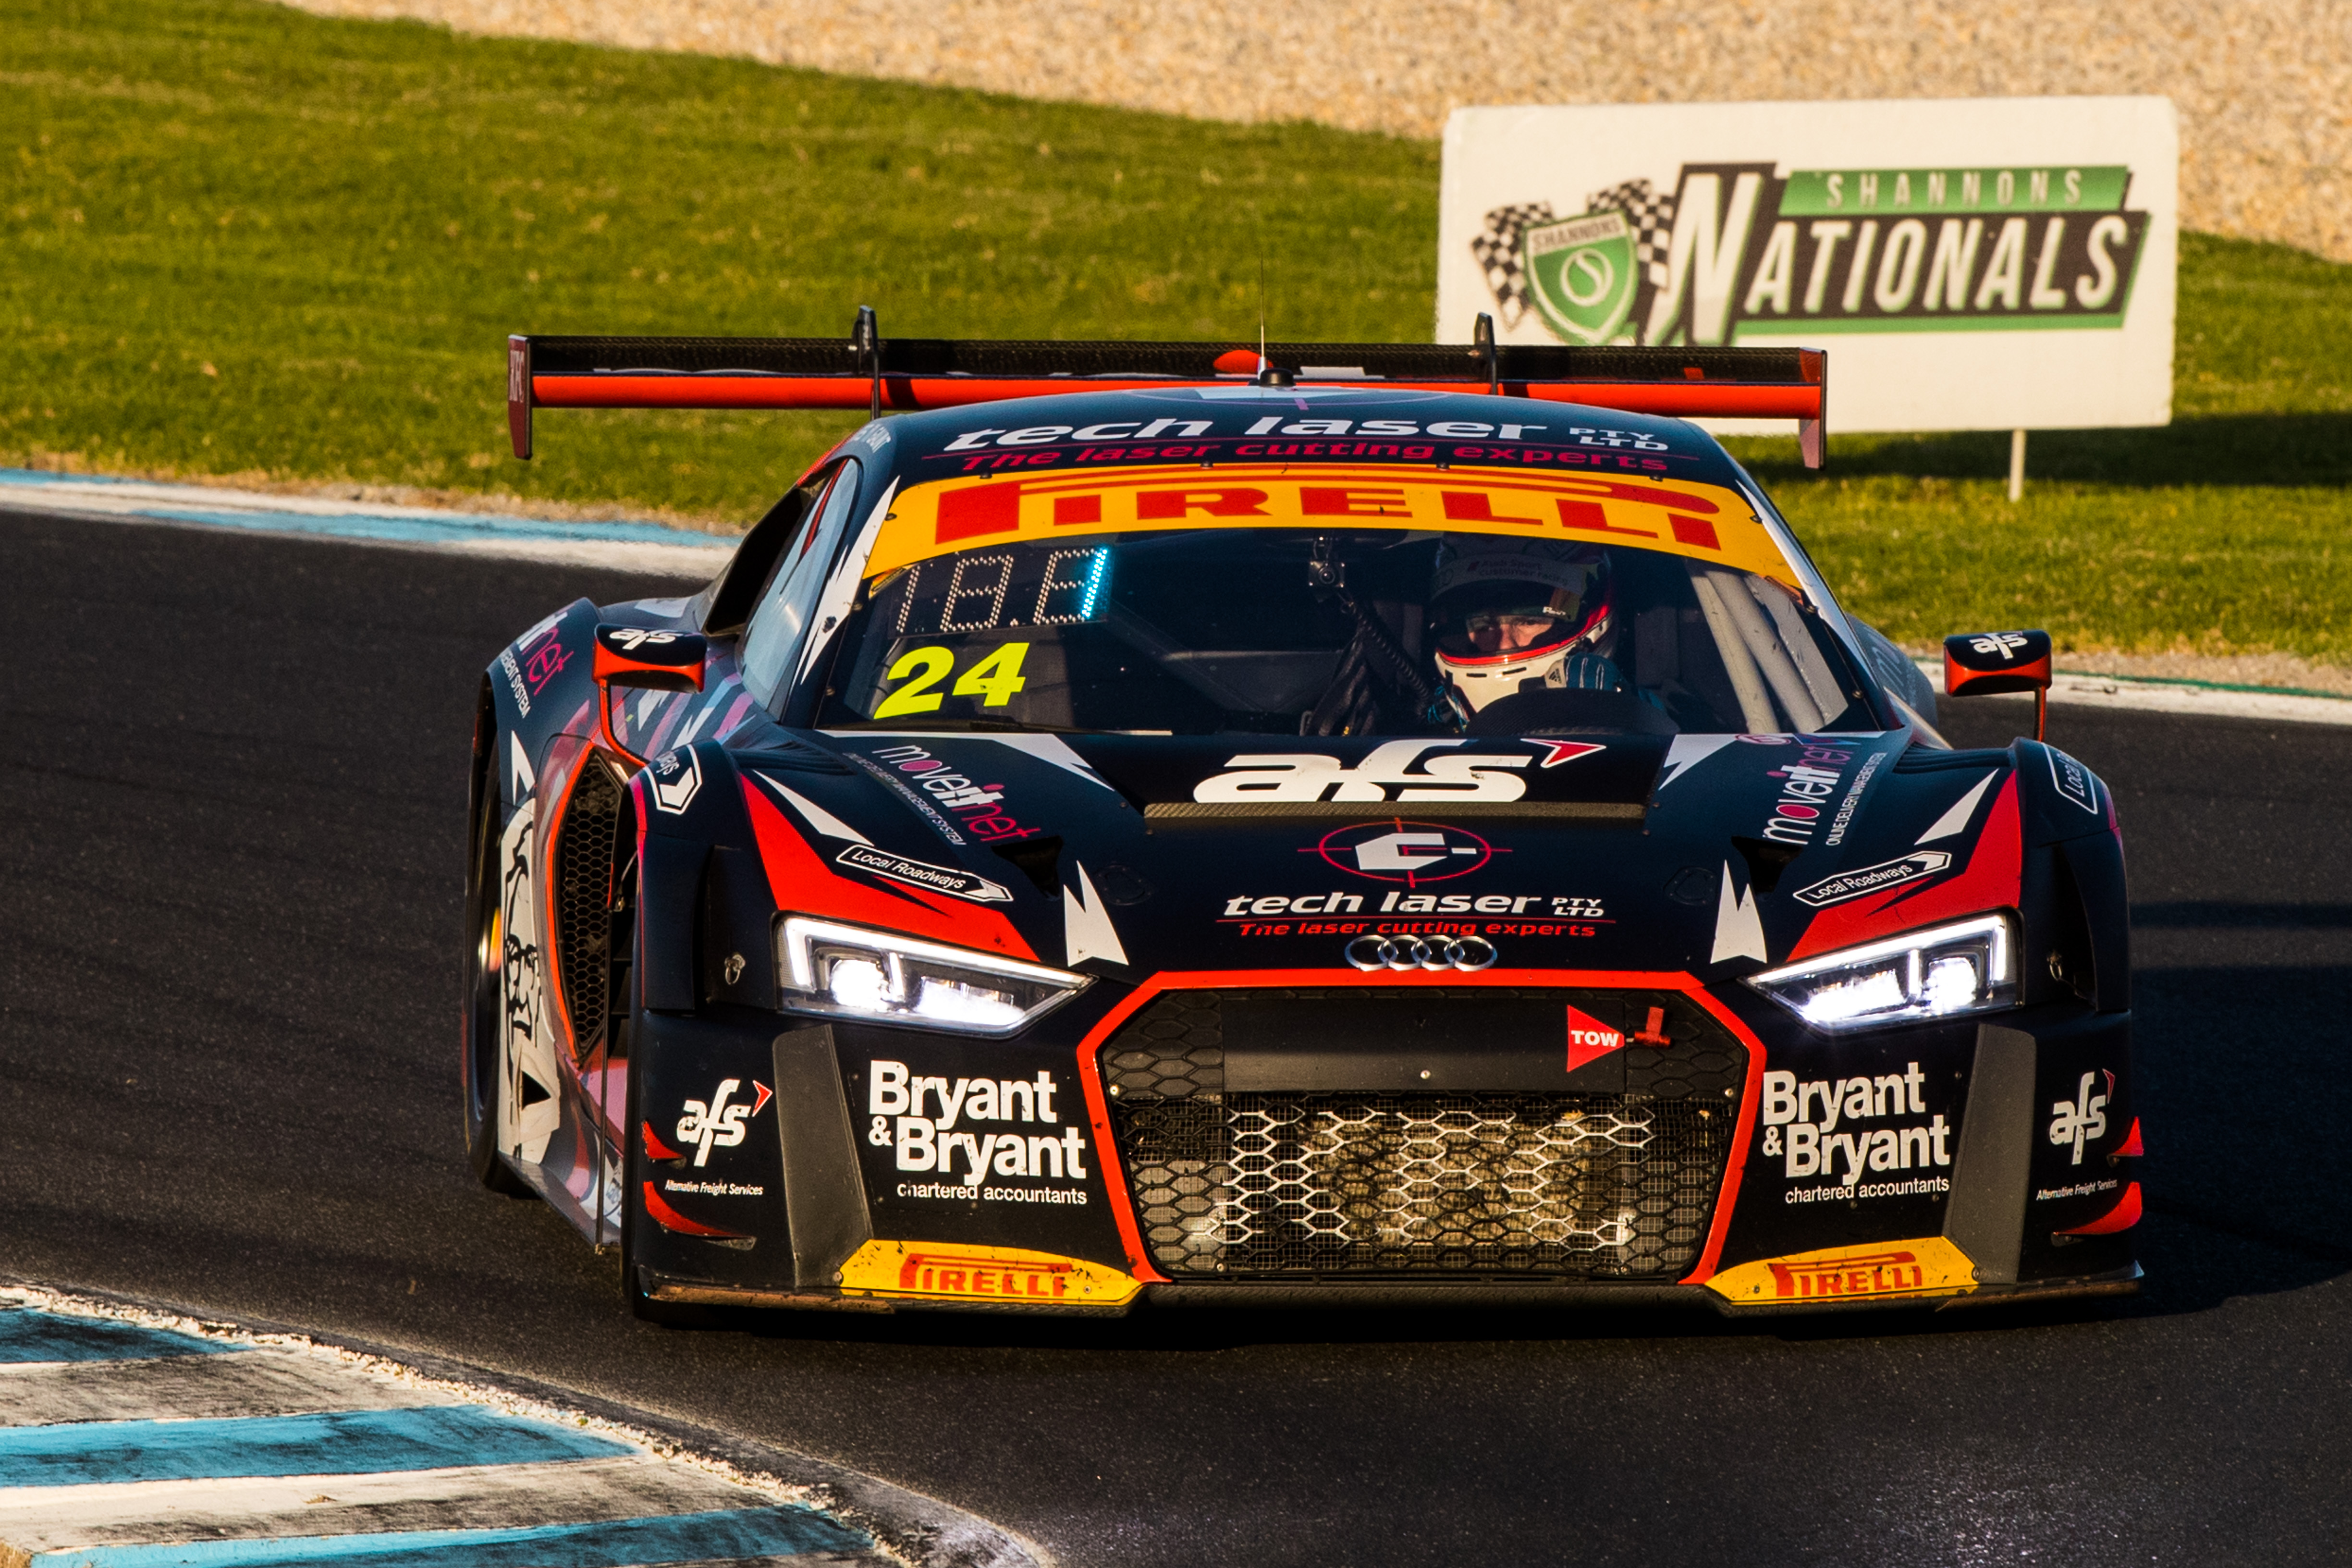 Bates & Gaunt victorious after incredible Phillip Island 101